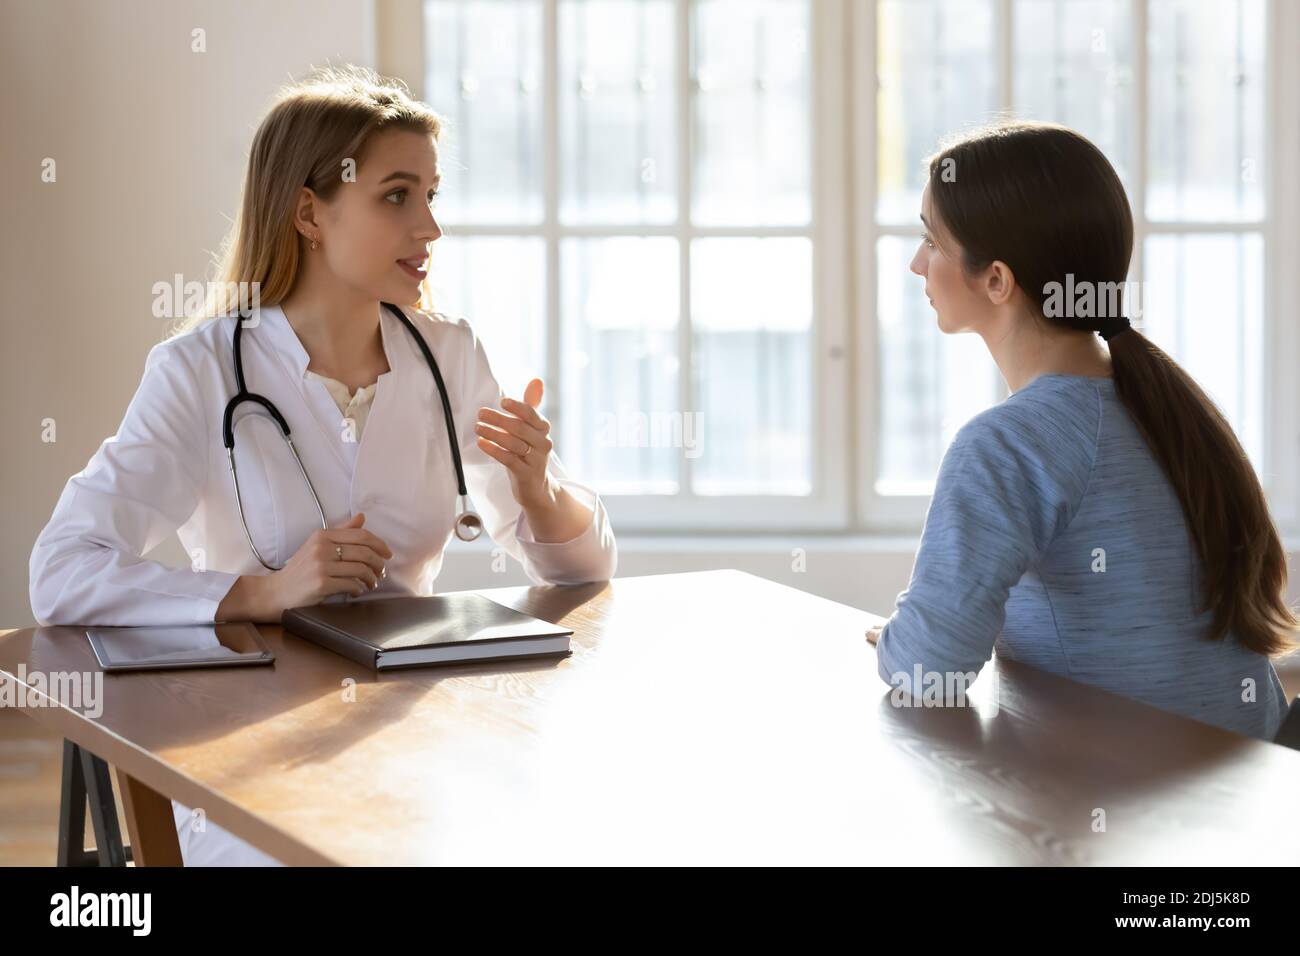 Female doctor have consultation with patient at hospital Stock Photo